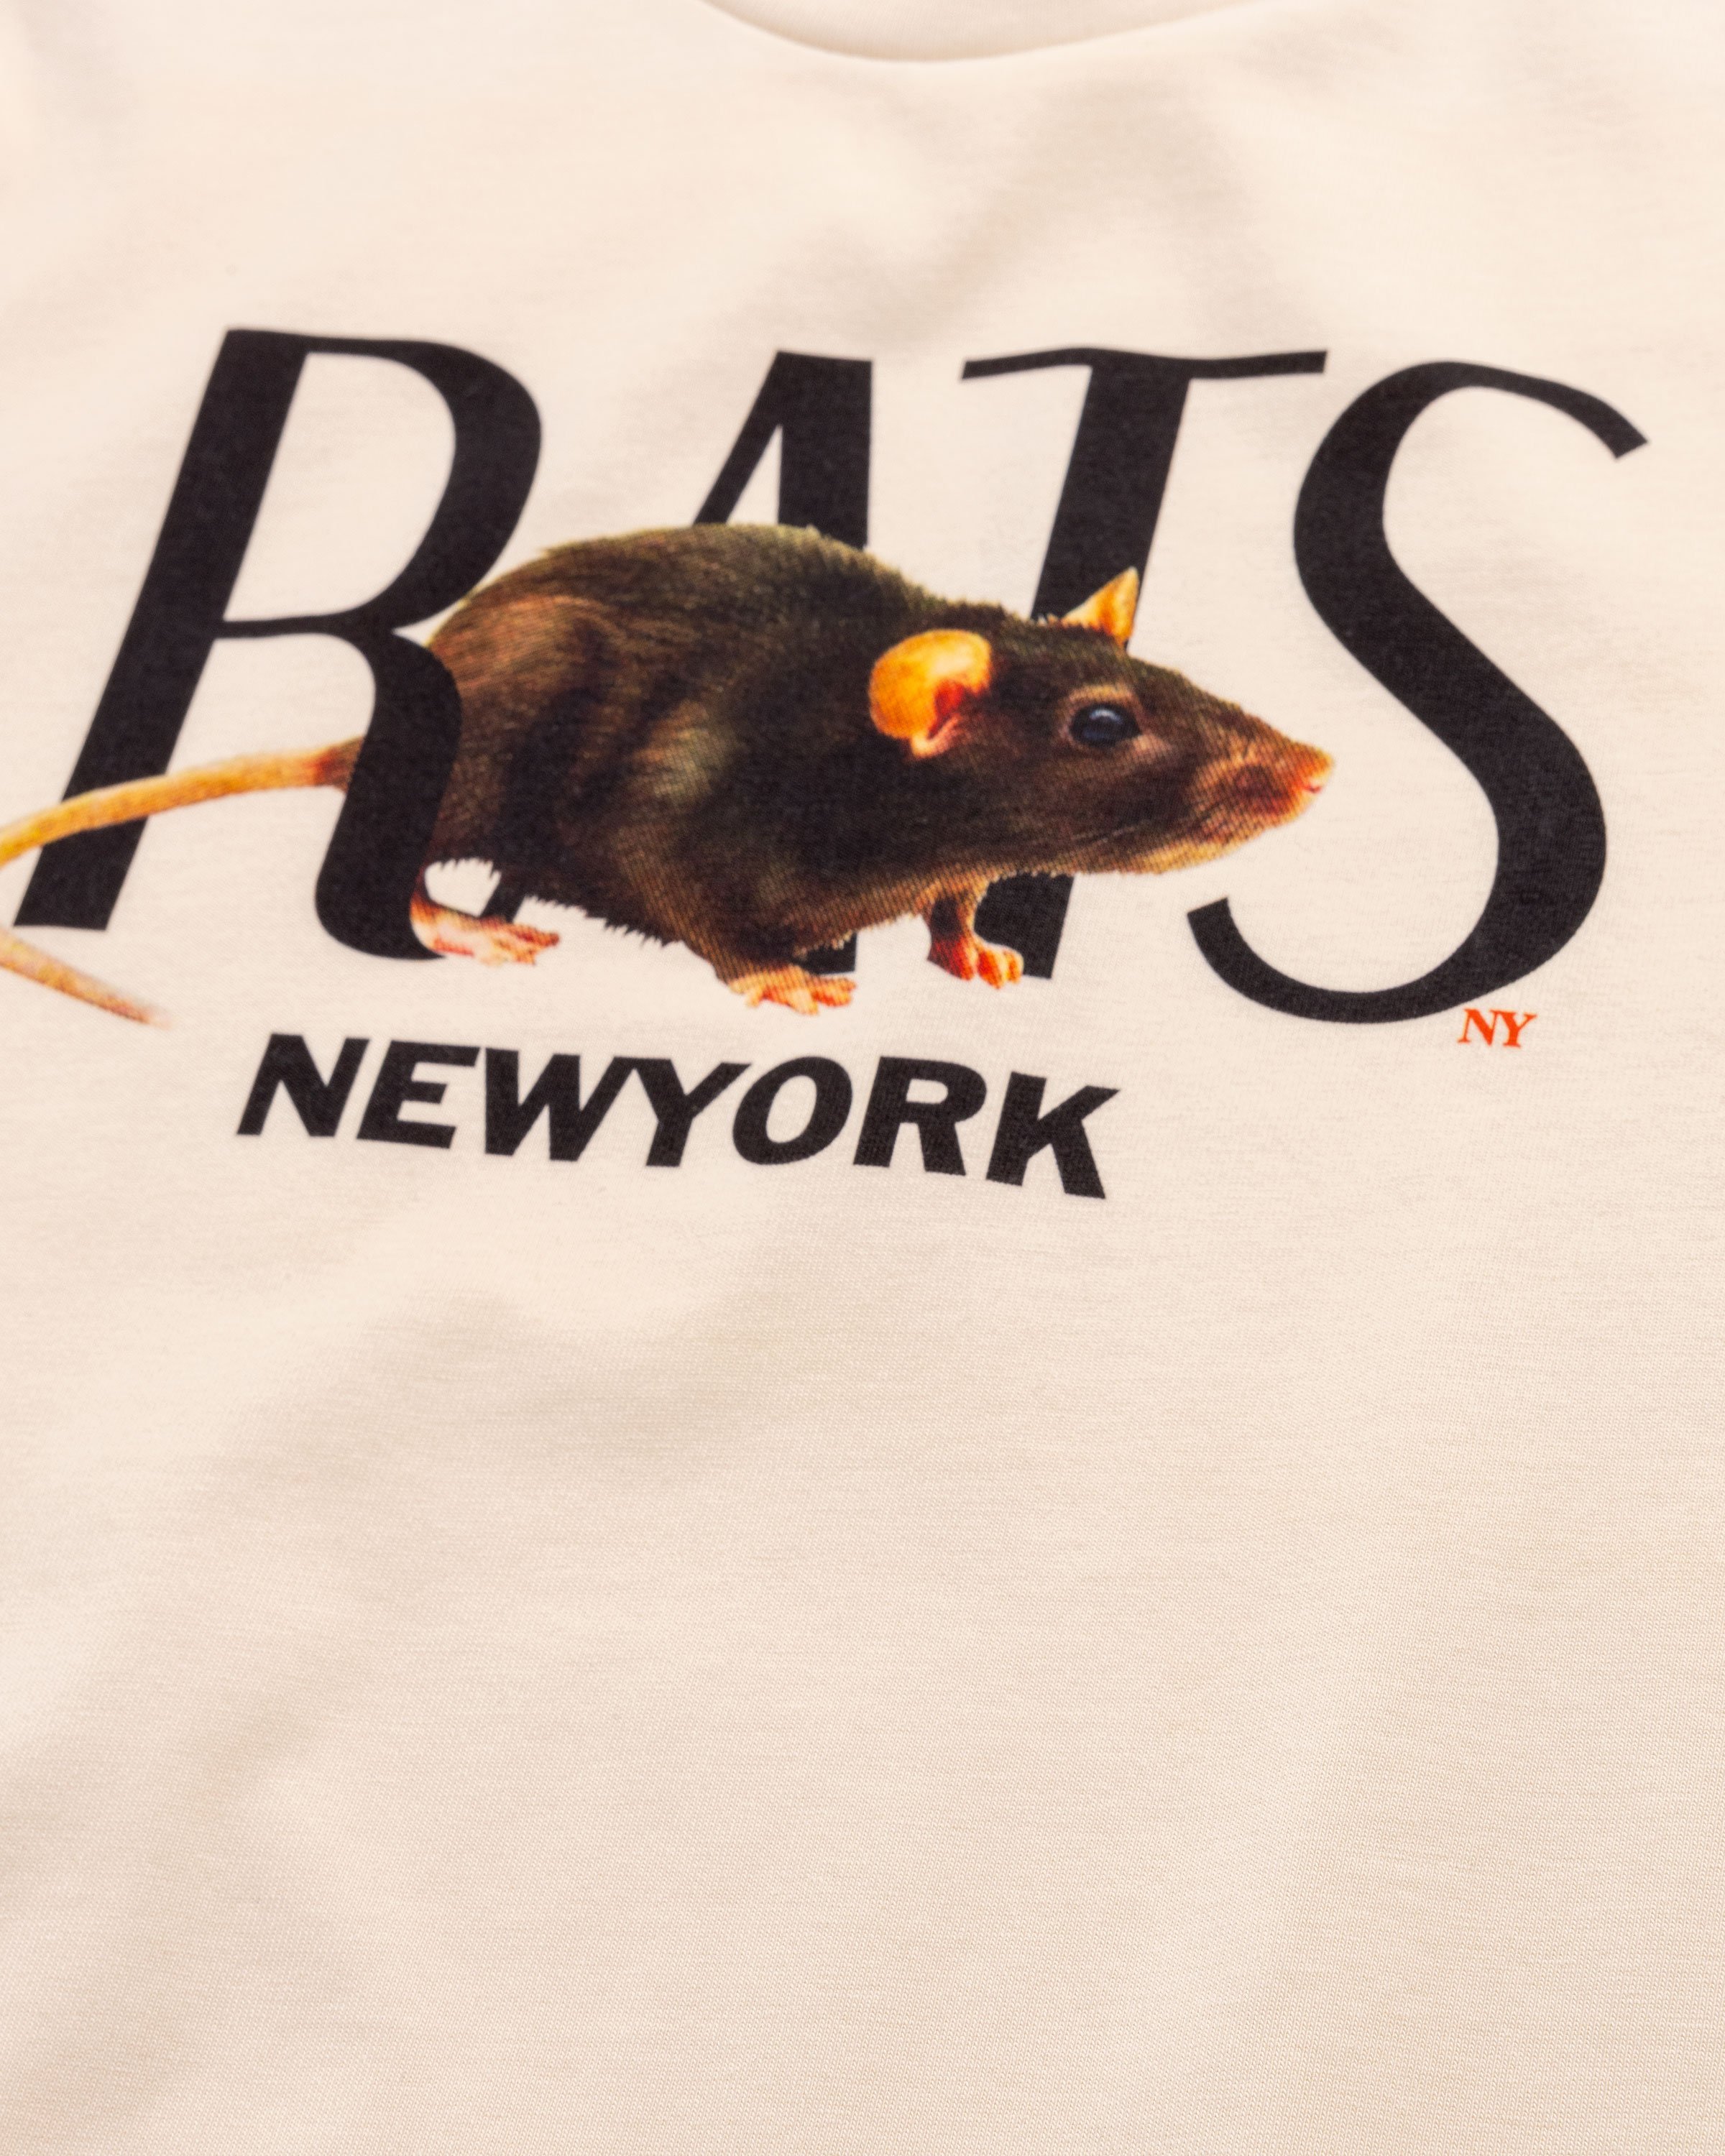 At The Moment x Highsnobiety - New York Rats T-Shirt - Clothing - Beige - Image 7